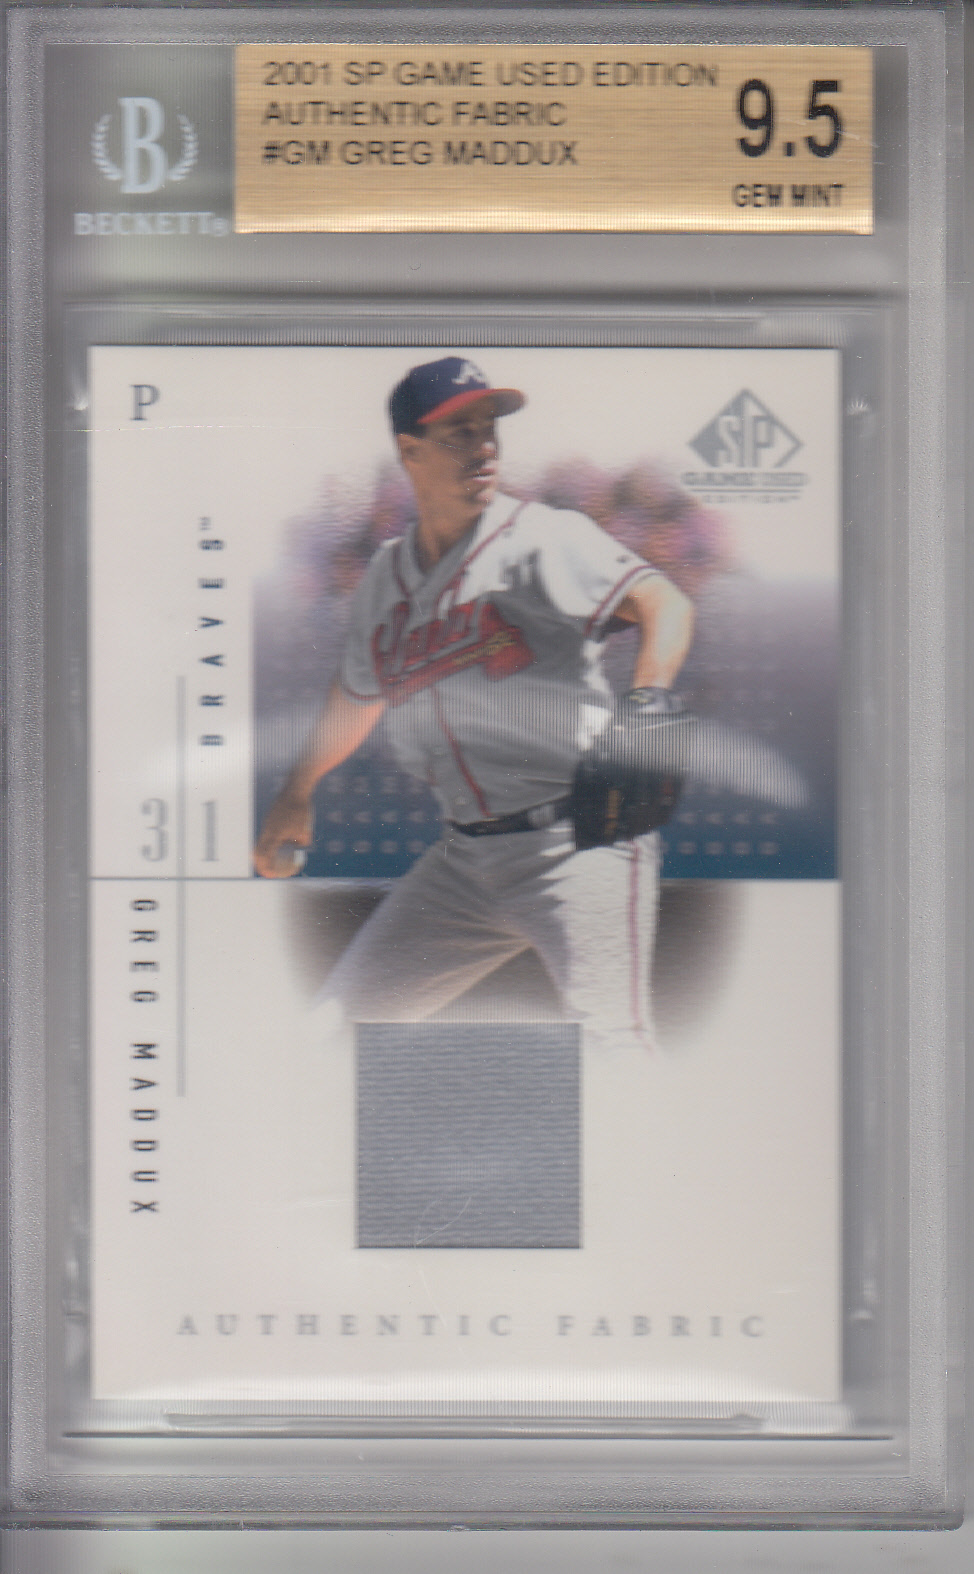 2001 SP Game Used Edition Authentic Fabric #GM Greg Maddux BRAVES BVG 9.5 GMT Z18047